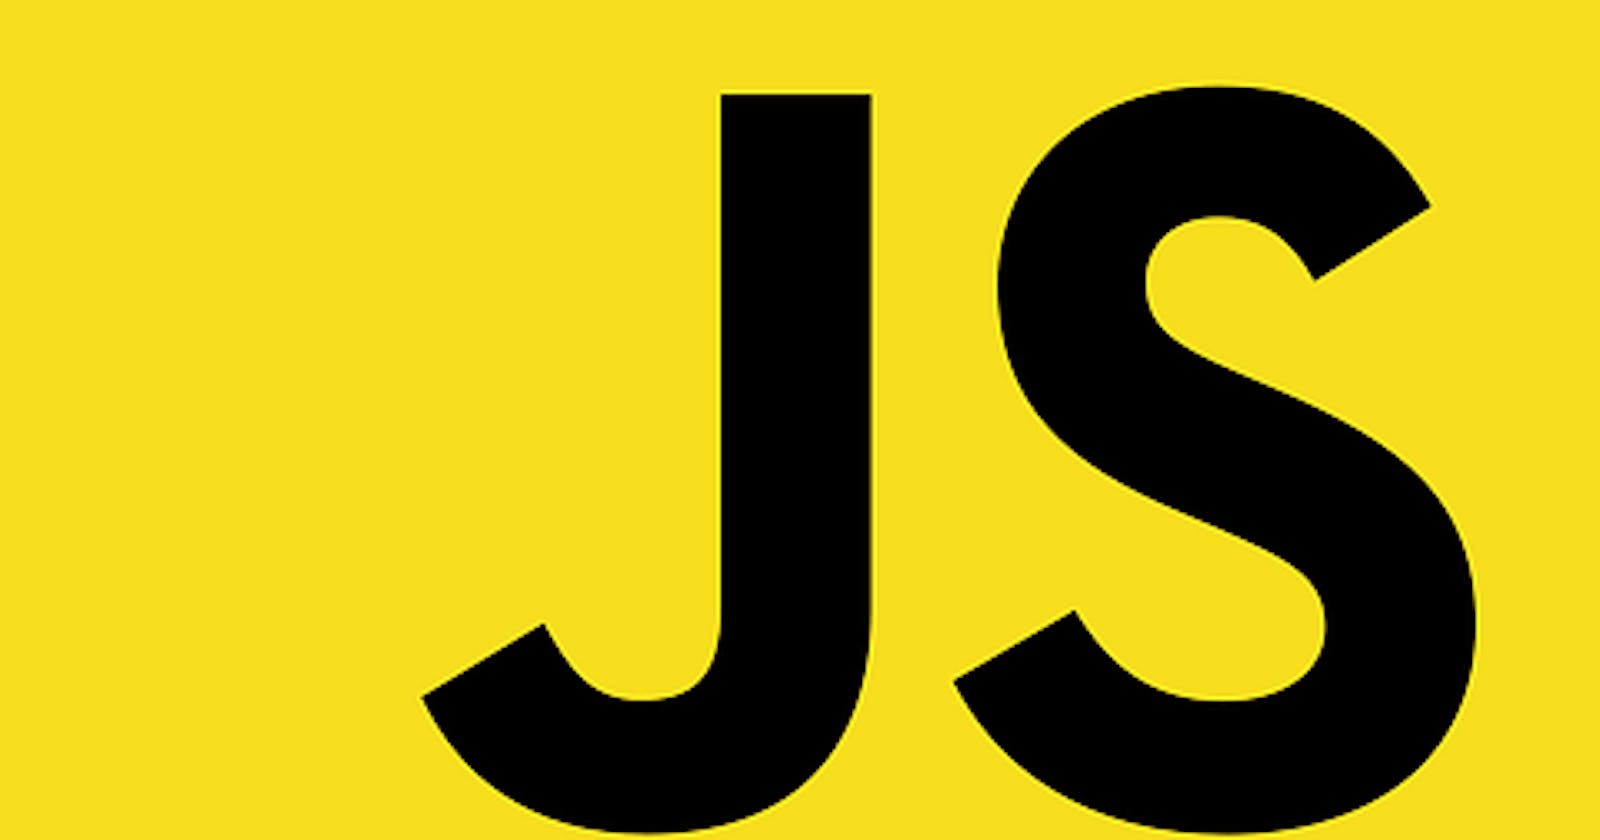 What can you do with JavaScript?